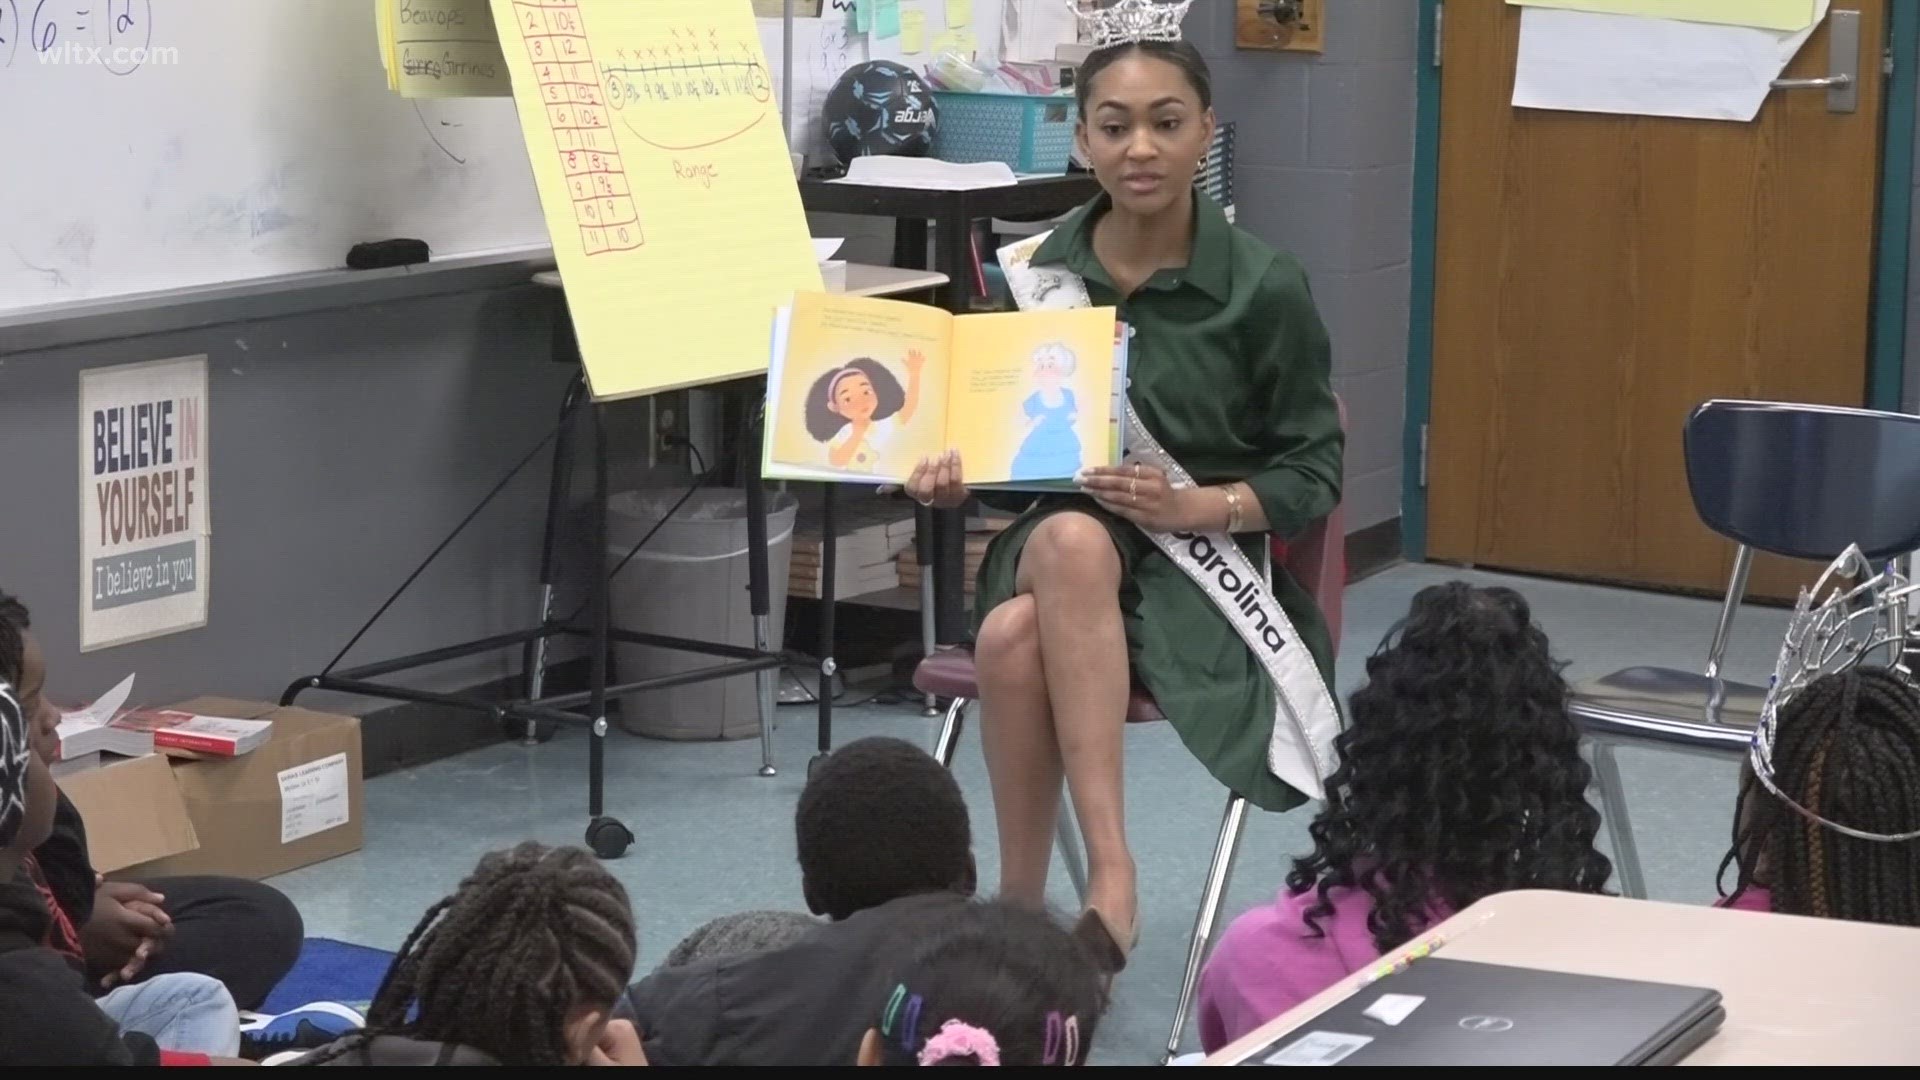 Pine Grove Elementary school invited women leaders to come and read to students in honor of National Women's month.